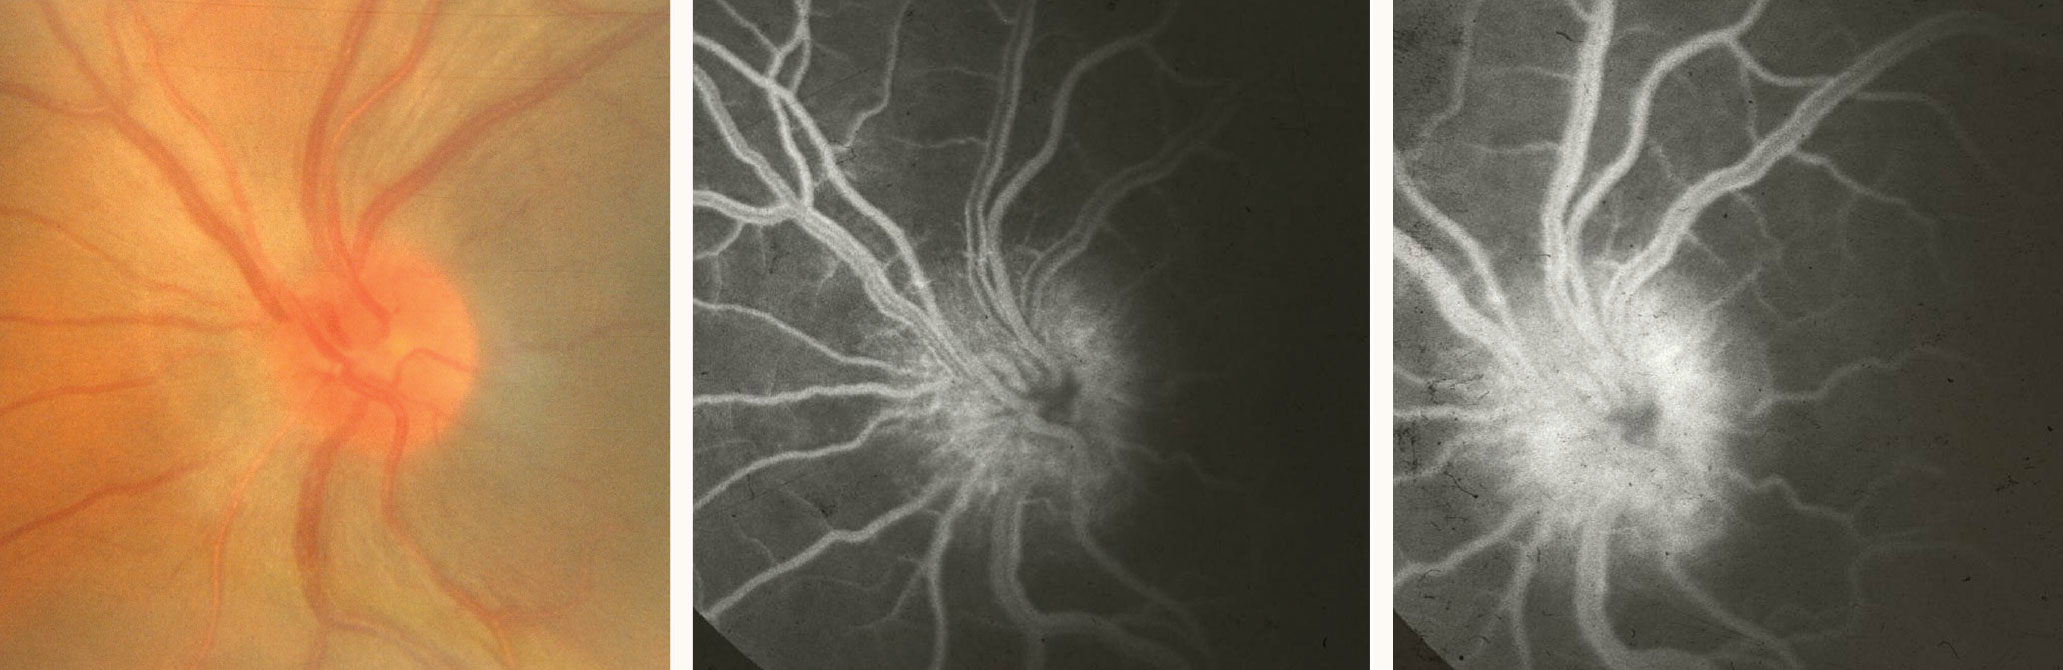 Pictured here is an HLA-B27–positive uveitis patient. Optic nerve head edema is evident on fundus photography (left), early fluorescein angiography (middle) and late fluorescein angiography (right).